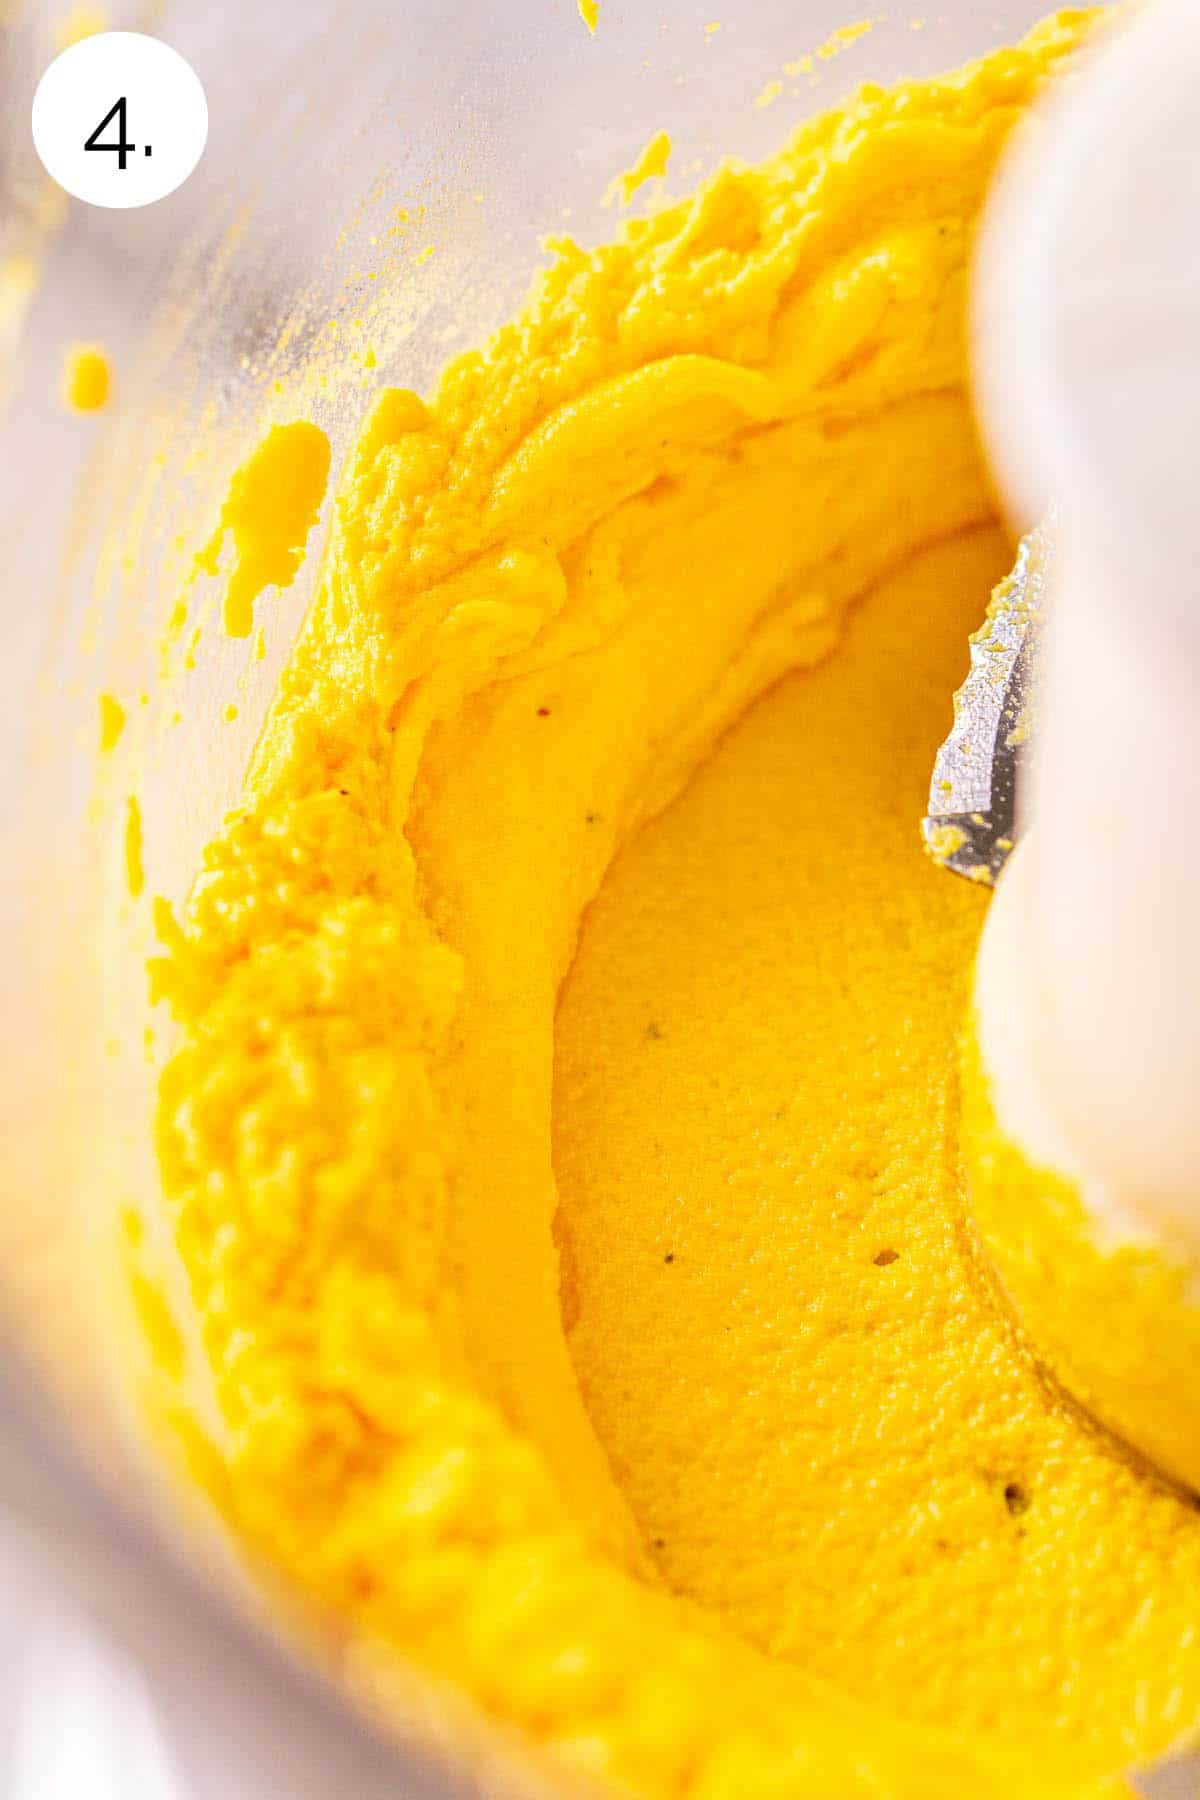 The egg yolk mixture in a food processor after they've been blended to make the filling.